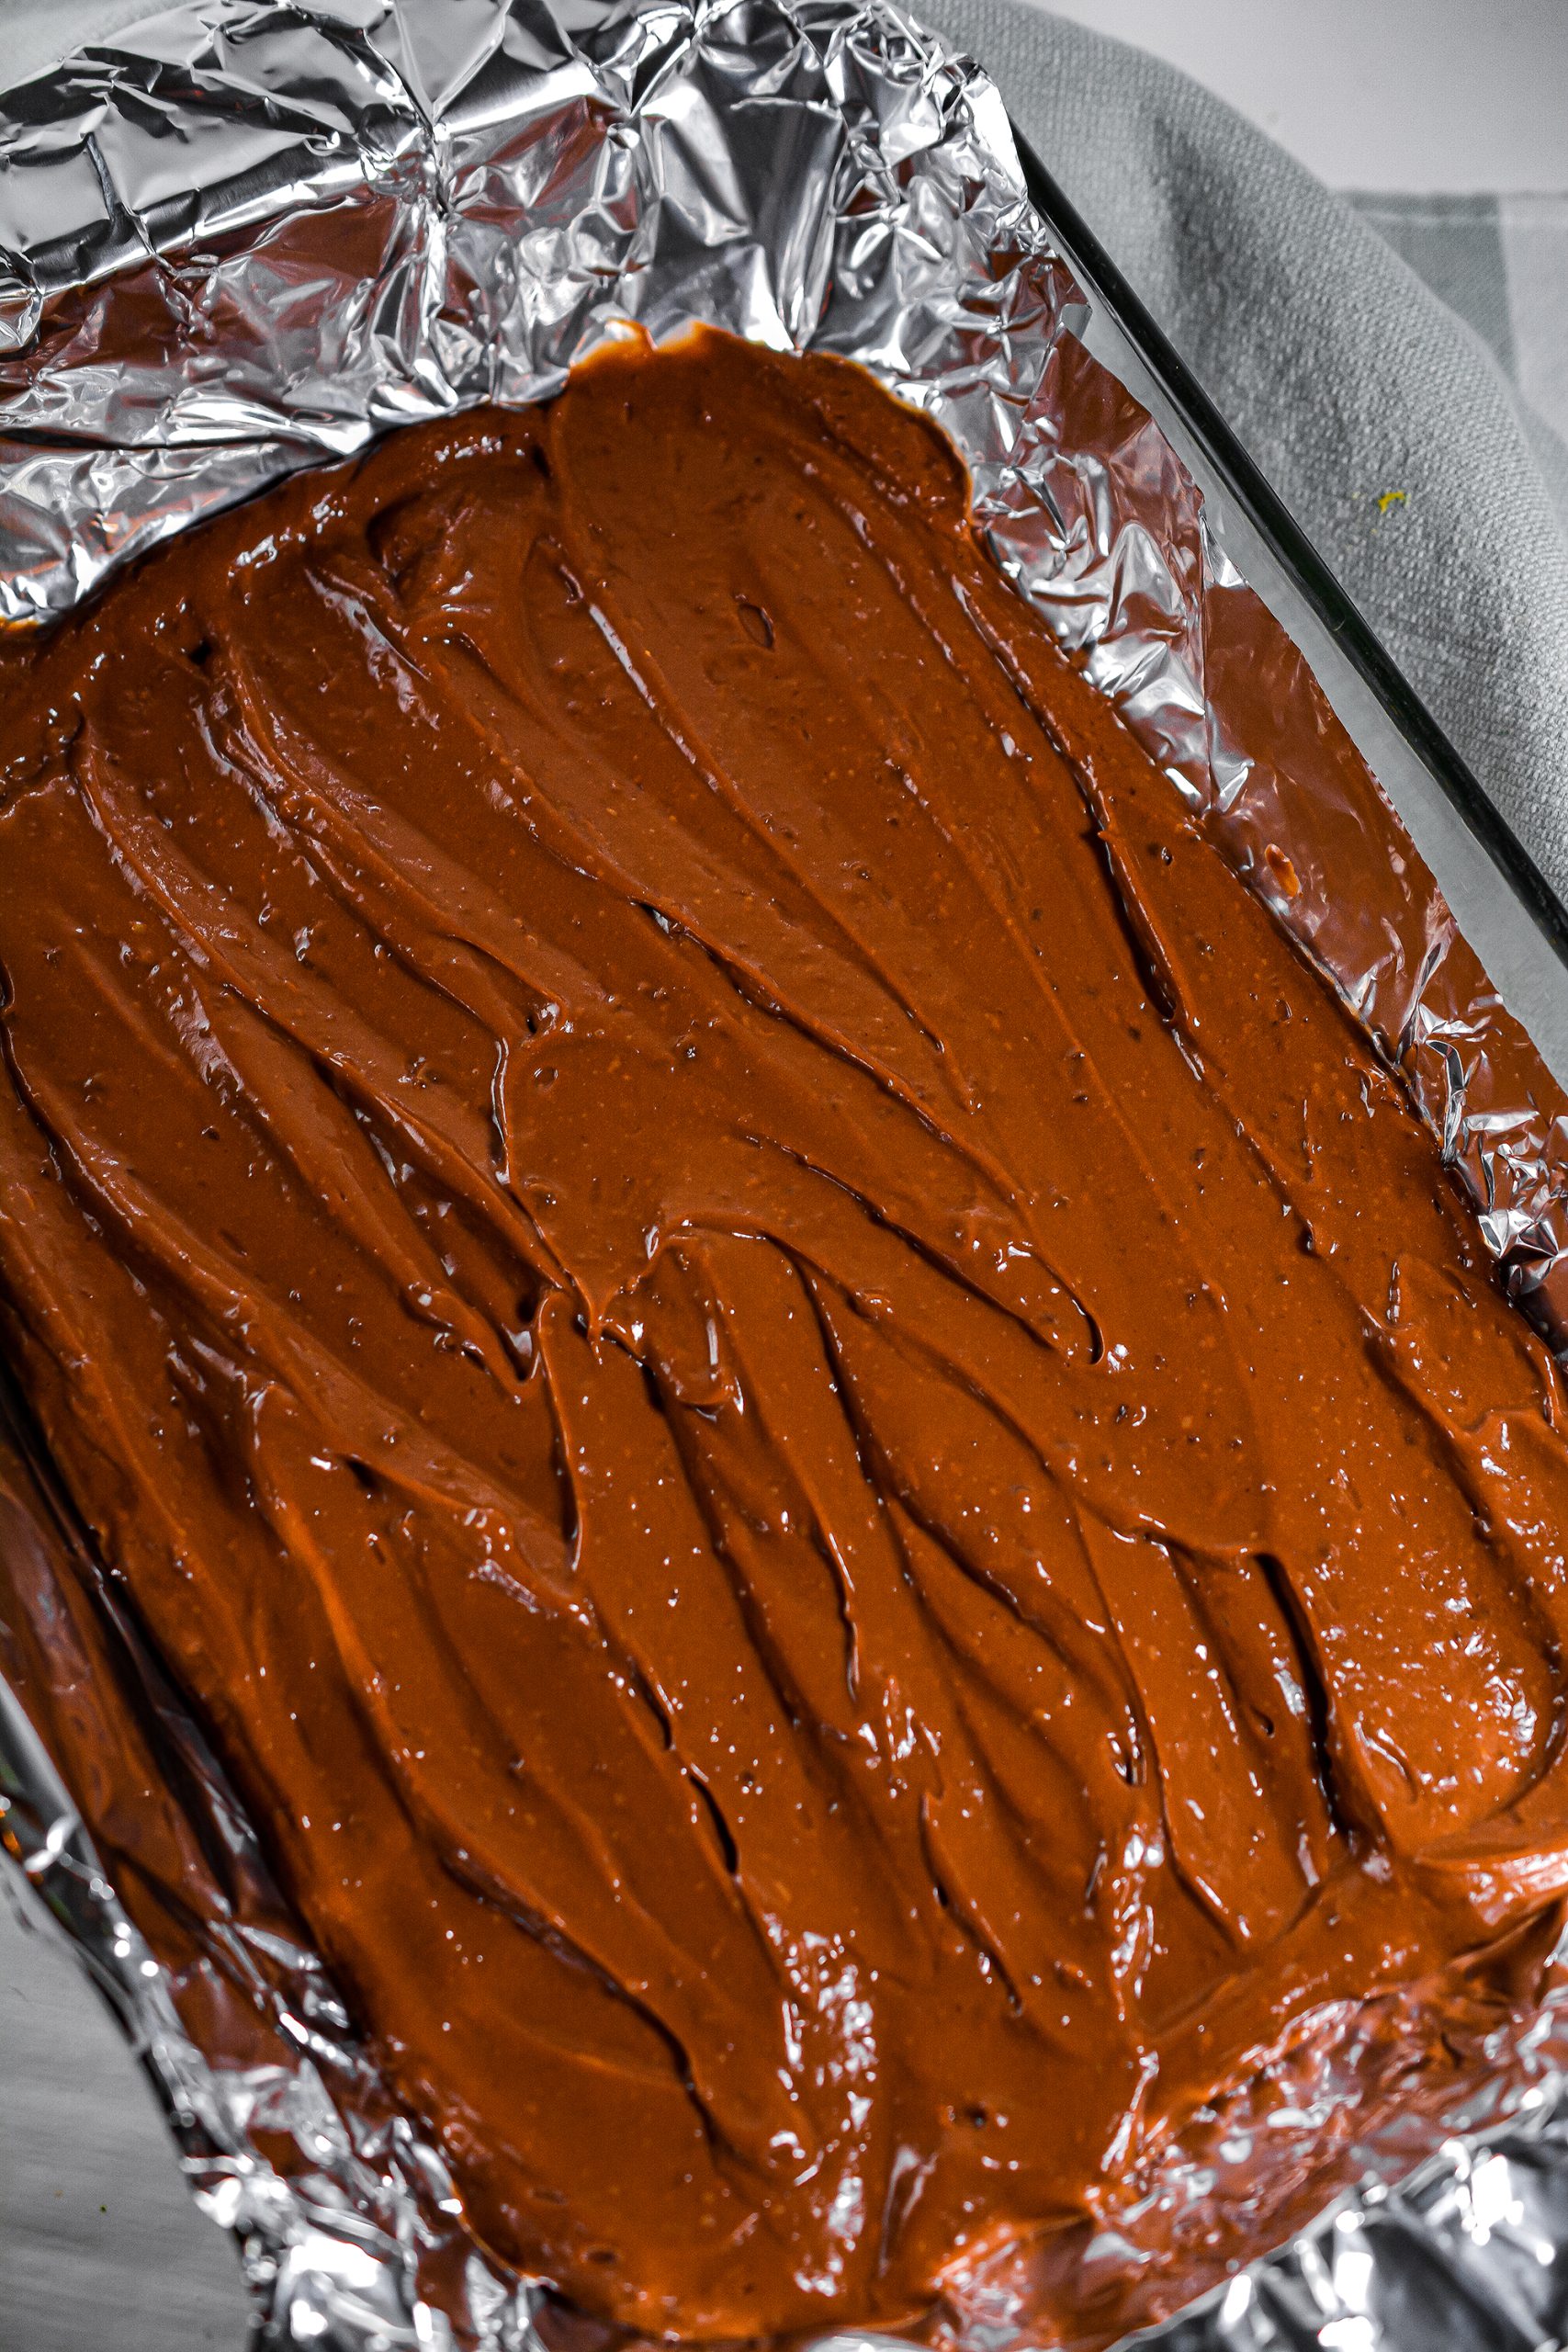 Layer the chocolate pudding evenly in the bottom of the baking dish.